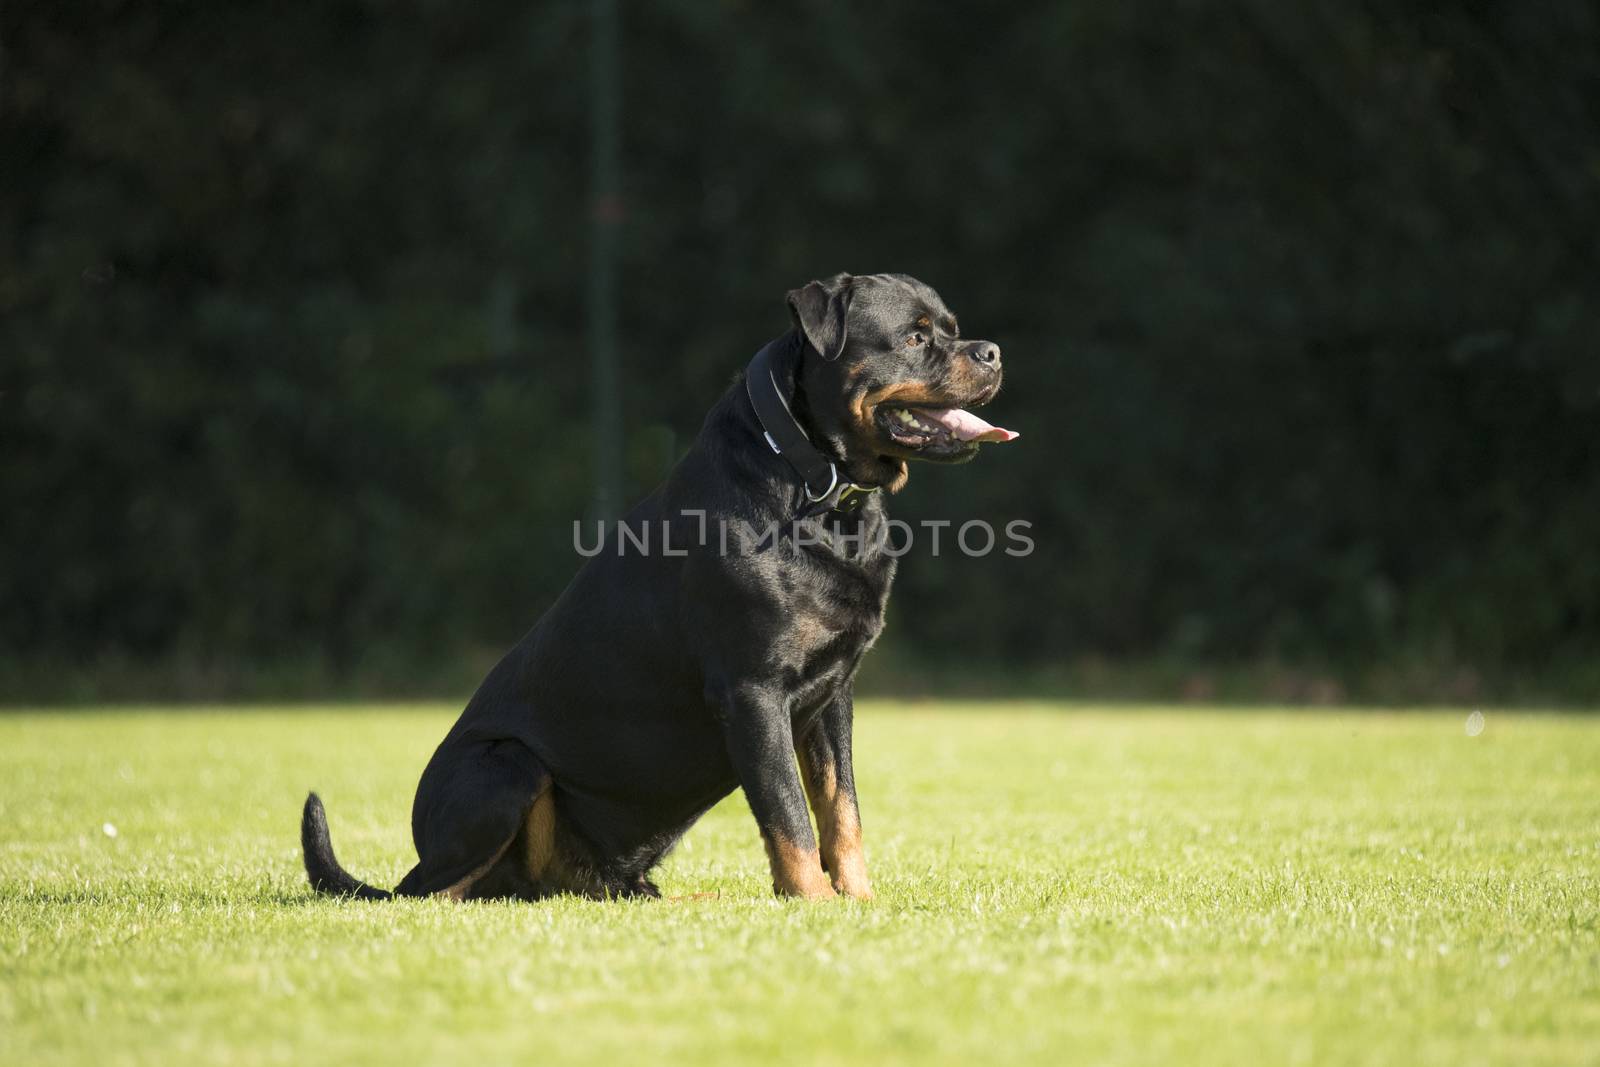 Dog, Rottweiler, sitting on grass, tongue out